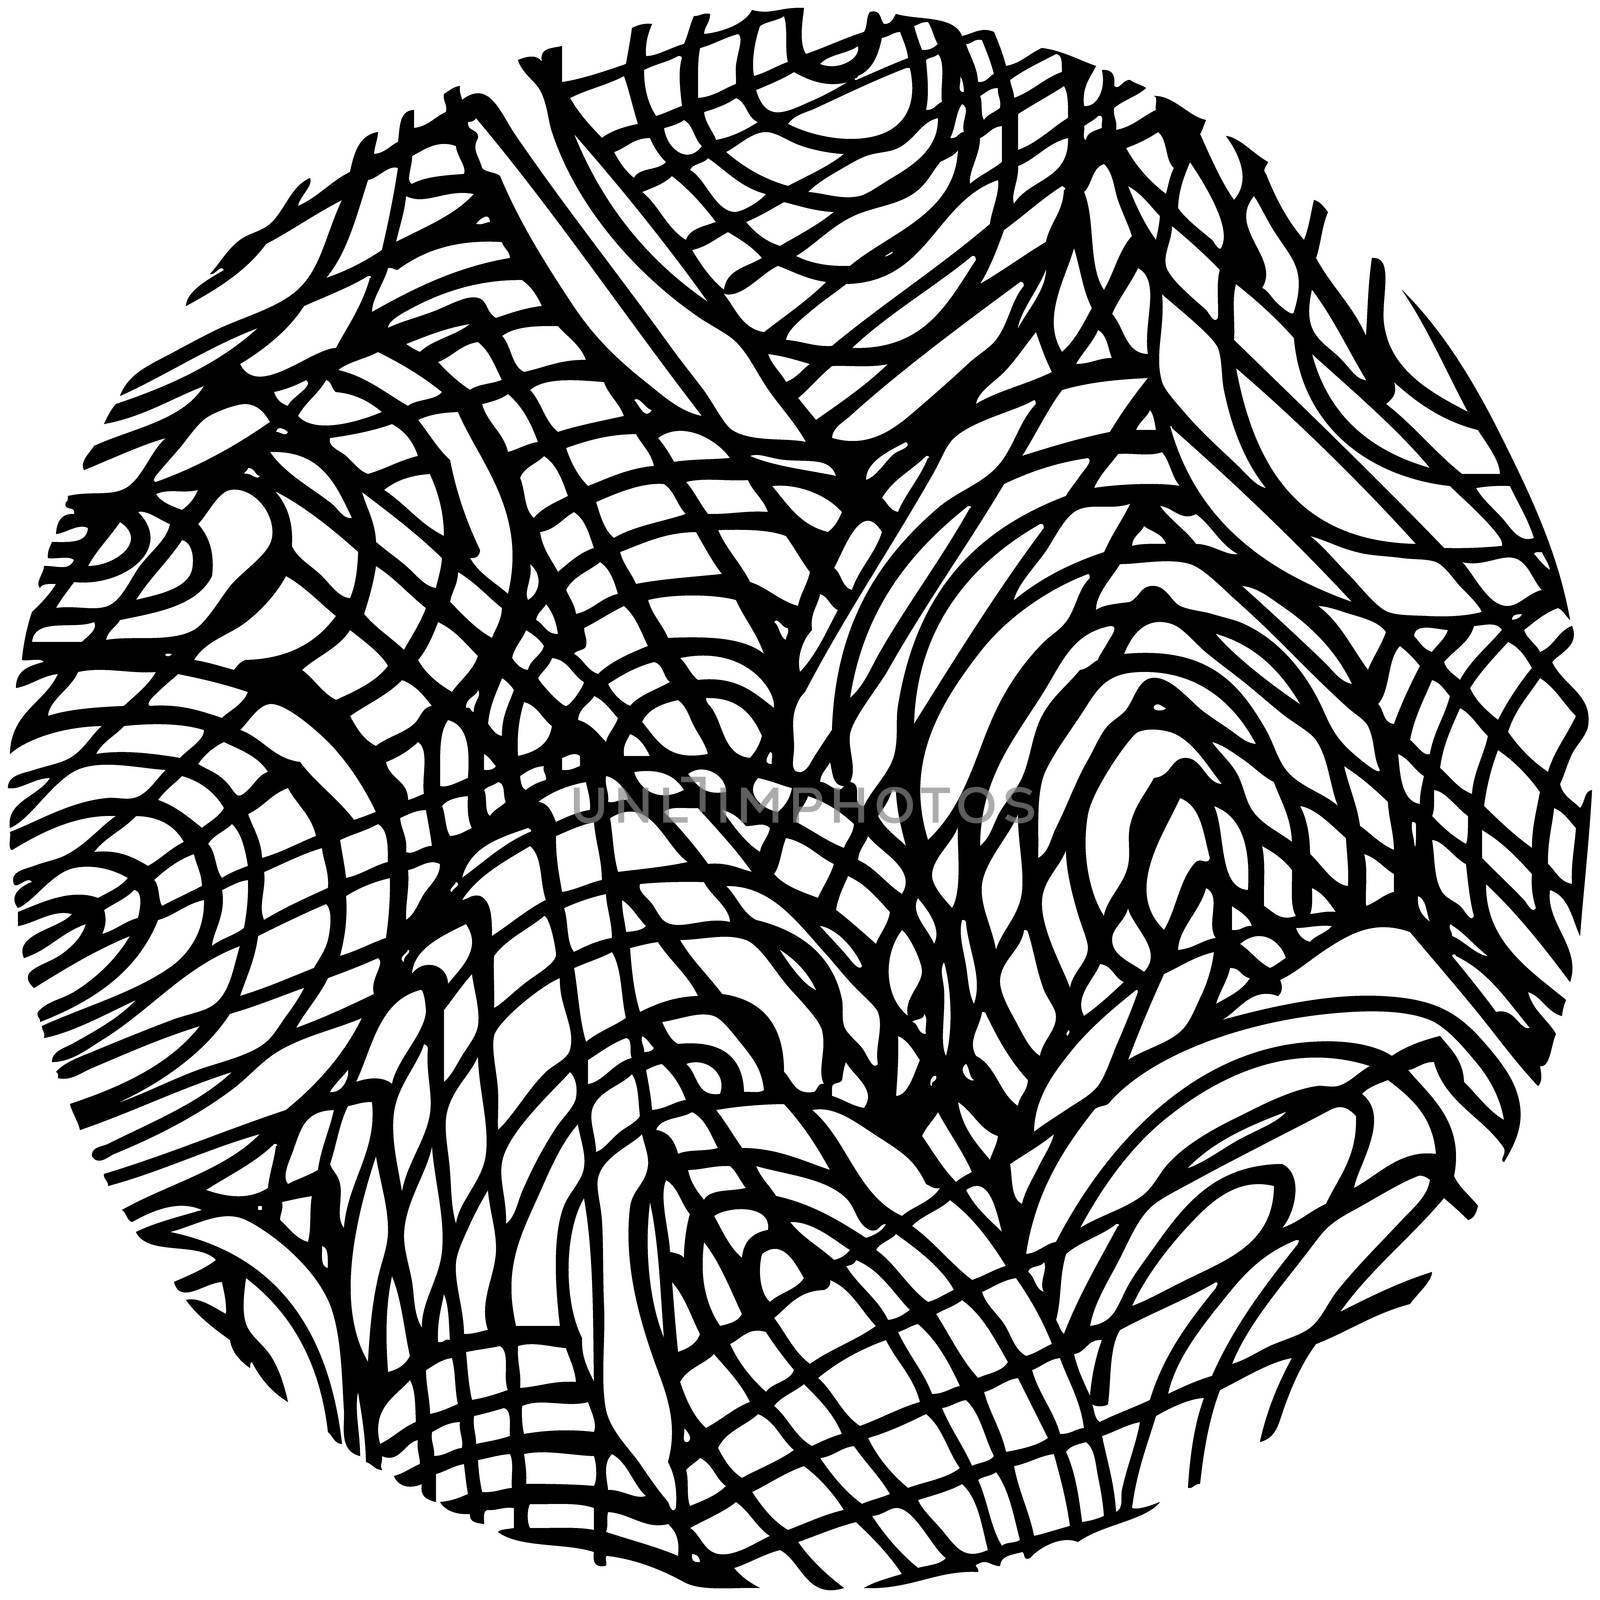 doodle abstract hand drawn pattern circle shaped on white background .